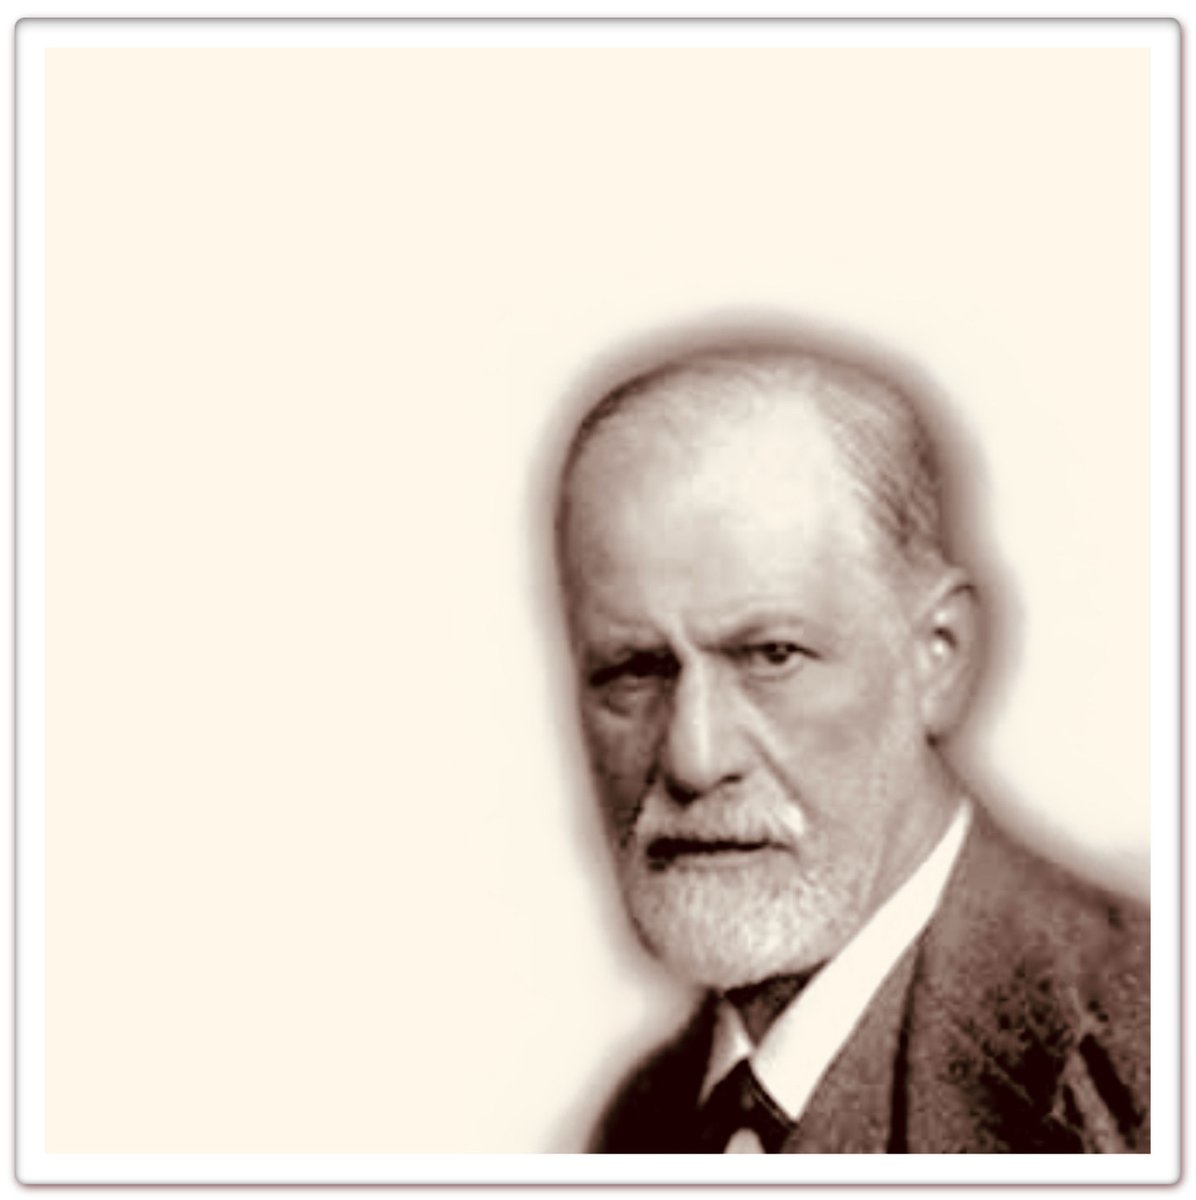 'It is inherent in human nature to consider a thing untrue if one does not like it.' Sigmund Freud